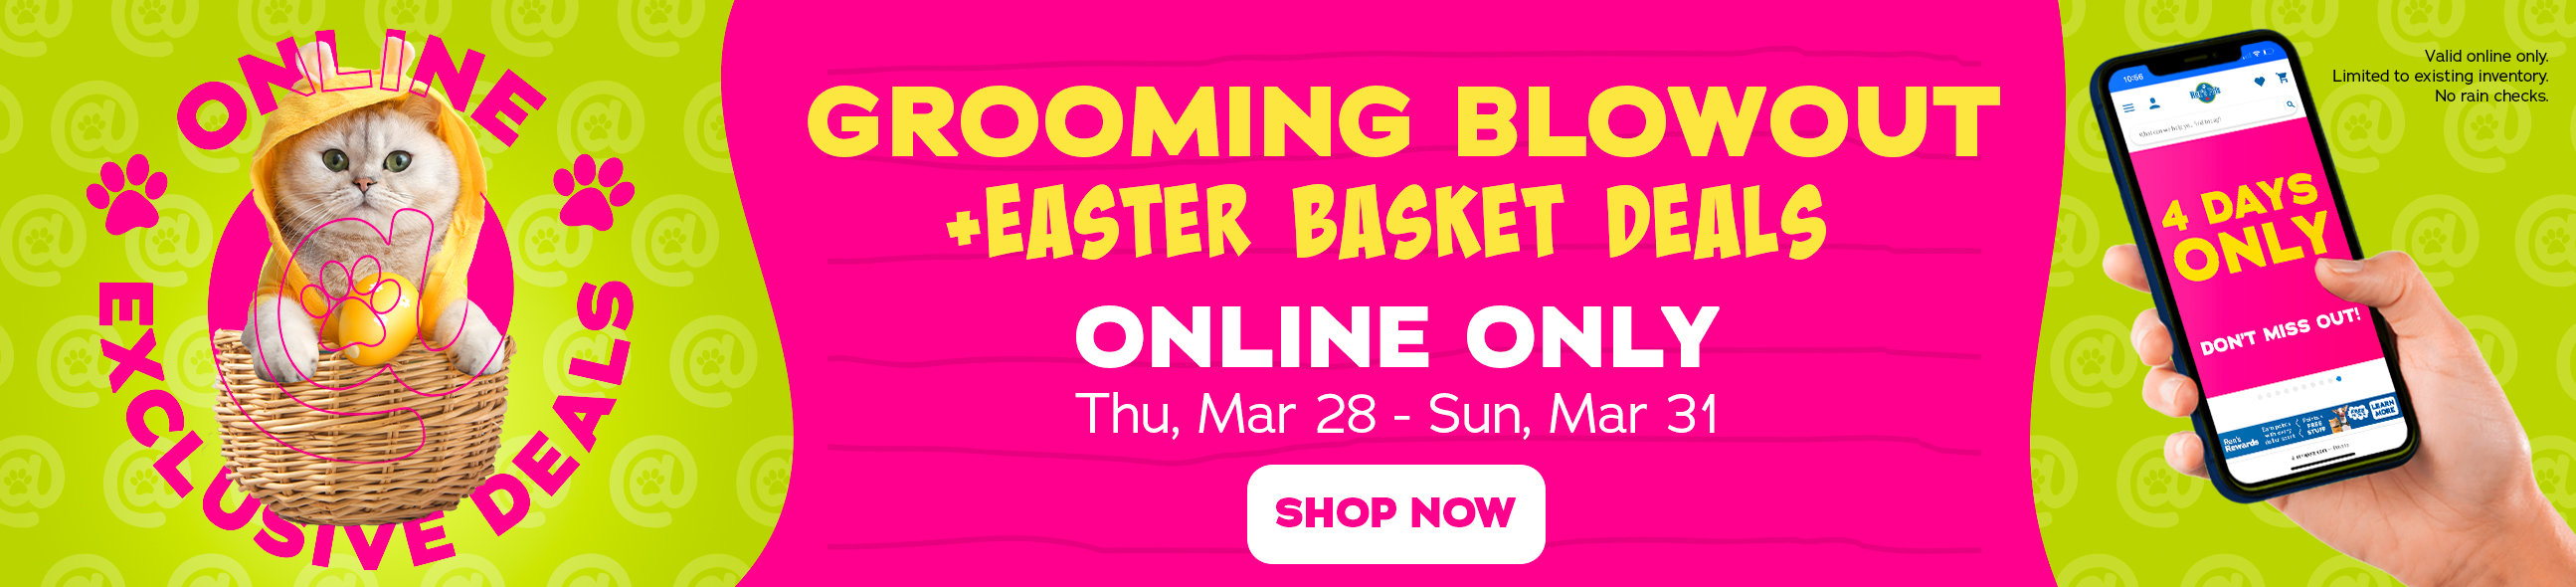 Grooming Blowout + easter basket deals - online only - shop now